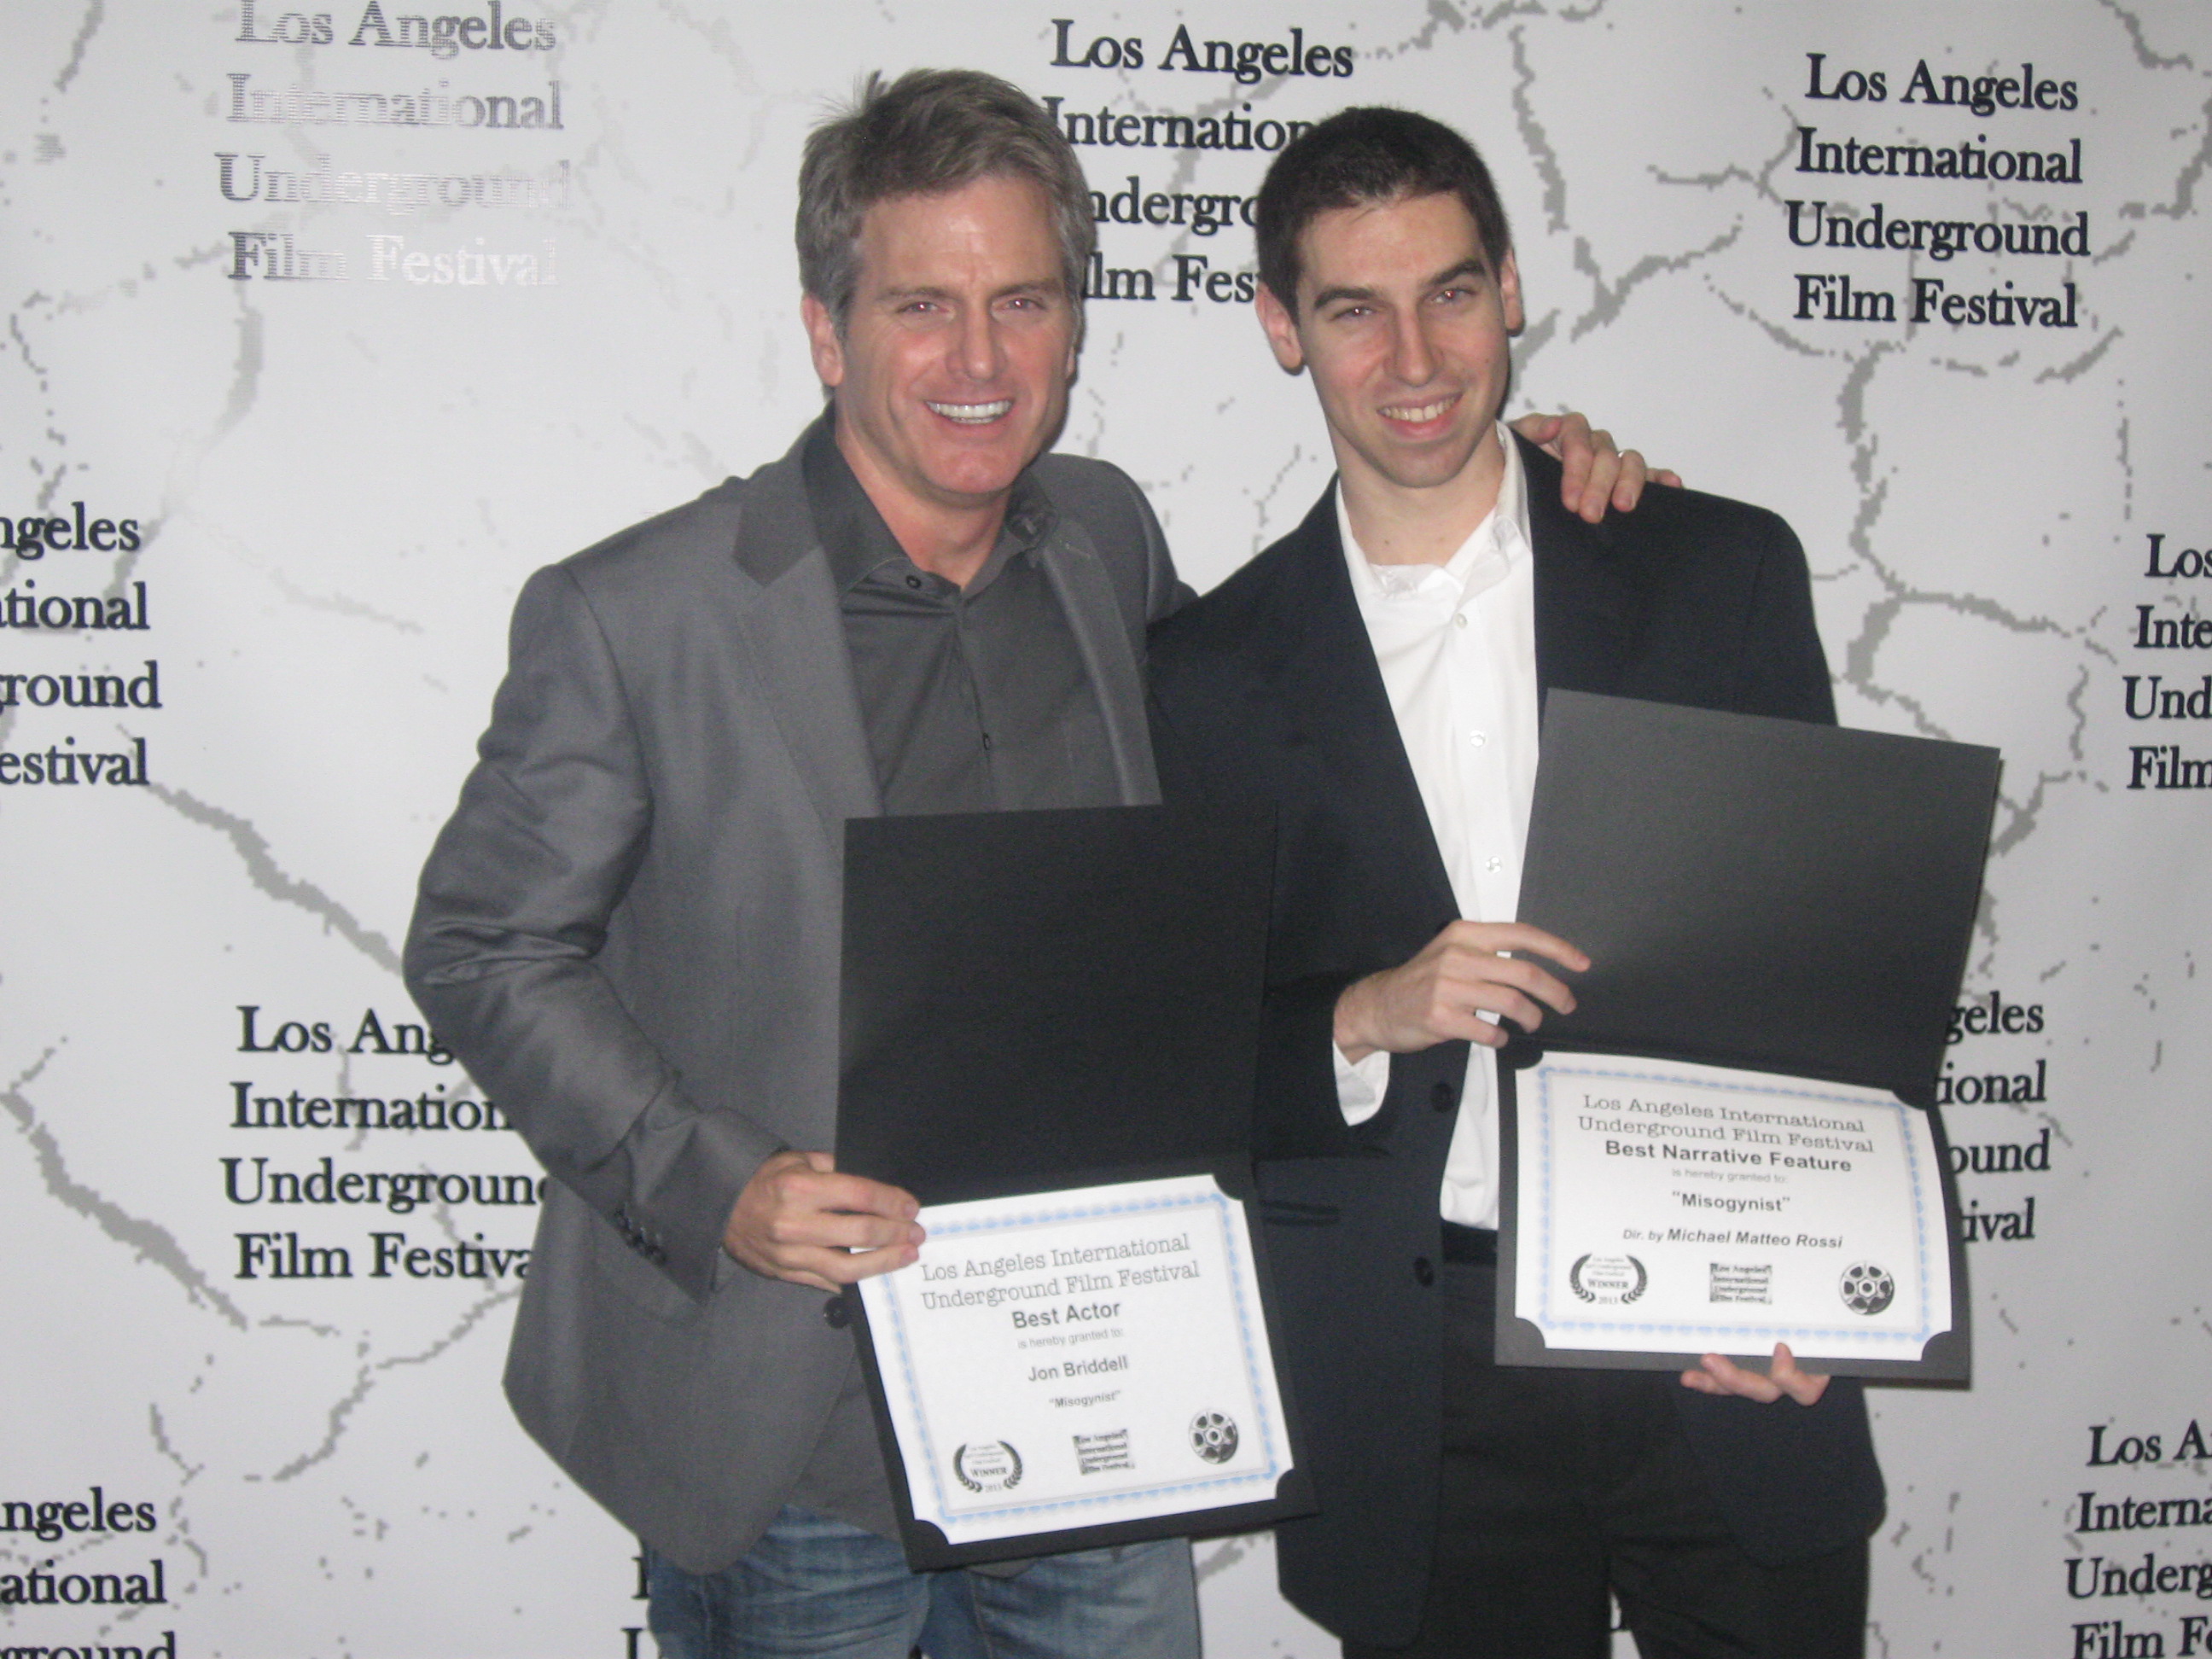 Michael Matteo Rossi with Jon Briddell at the LA Underground Film Festival for Misogynist. Won Best Feature and Best Actor.